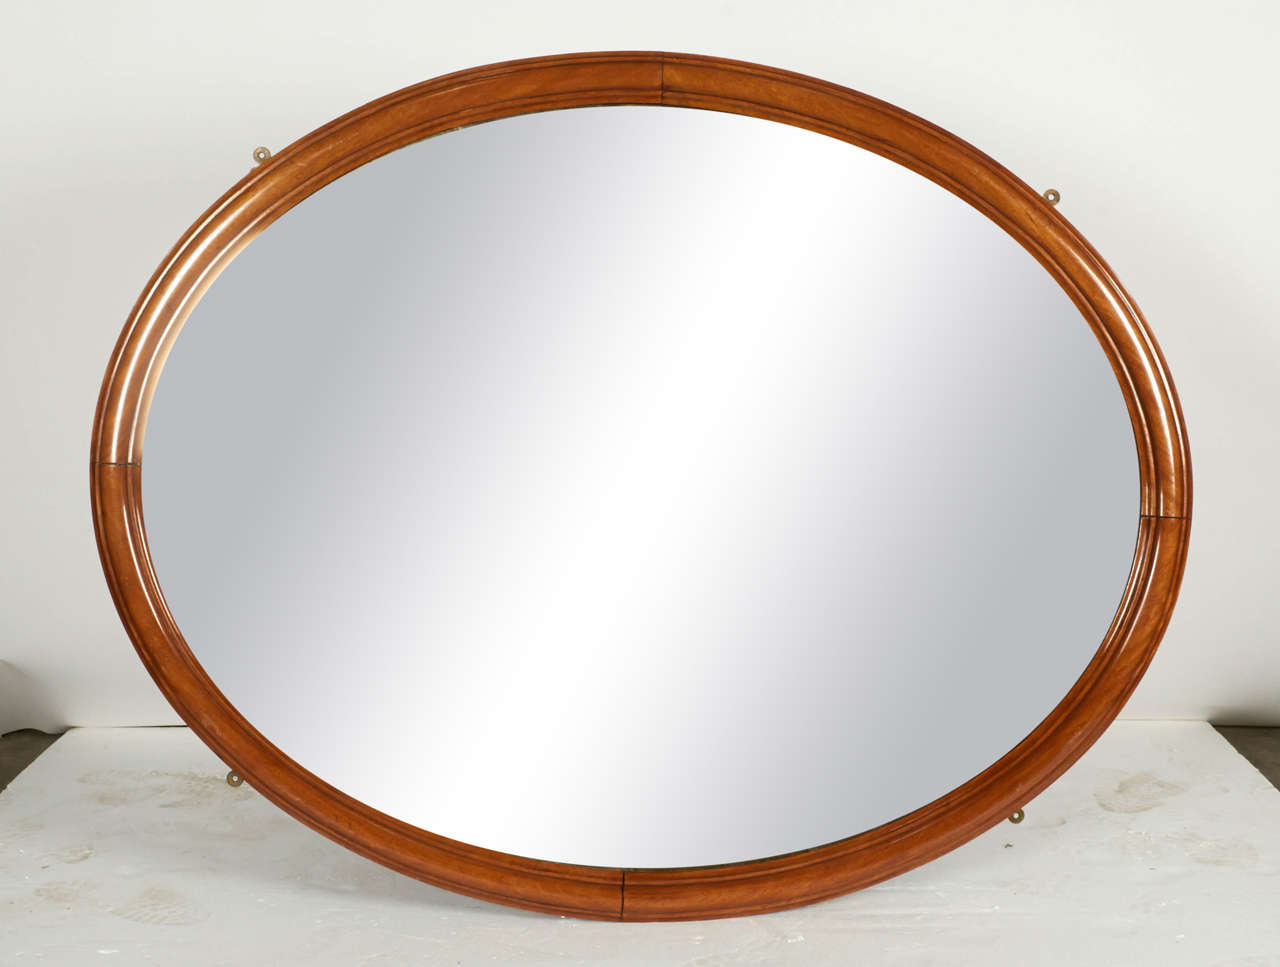 Handsome oak framed mirror with an almost golden wood grain. Four exposed metal brackets were possibly used to secure this mirror to a wall of a ship at sea. Frame is 3